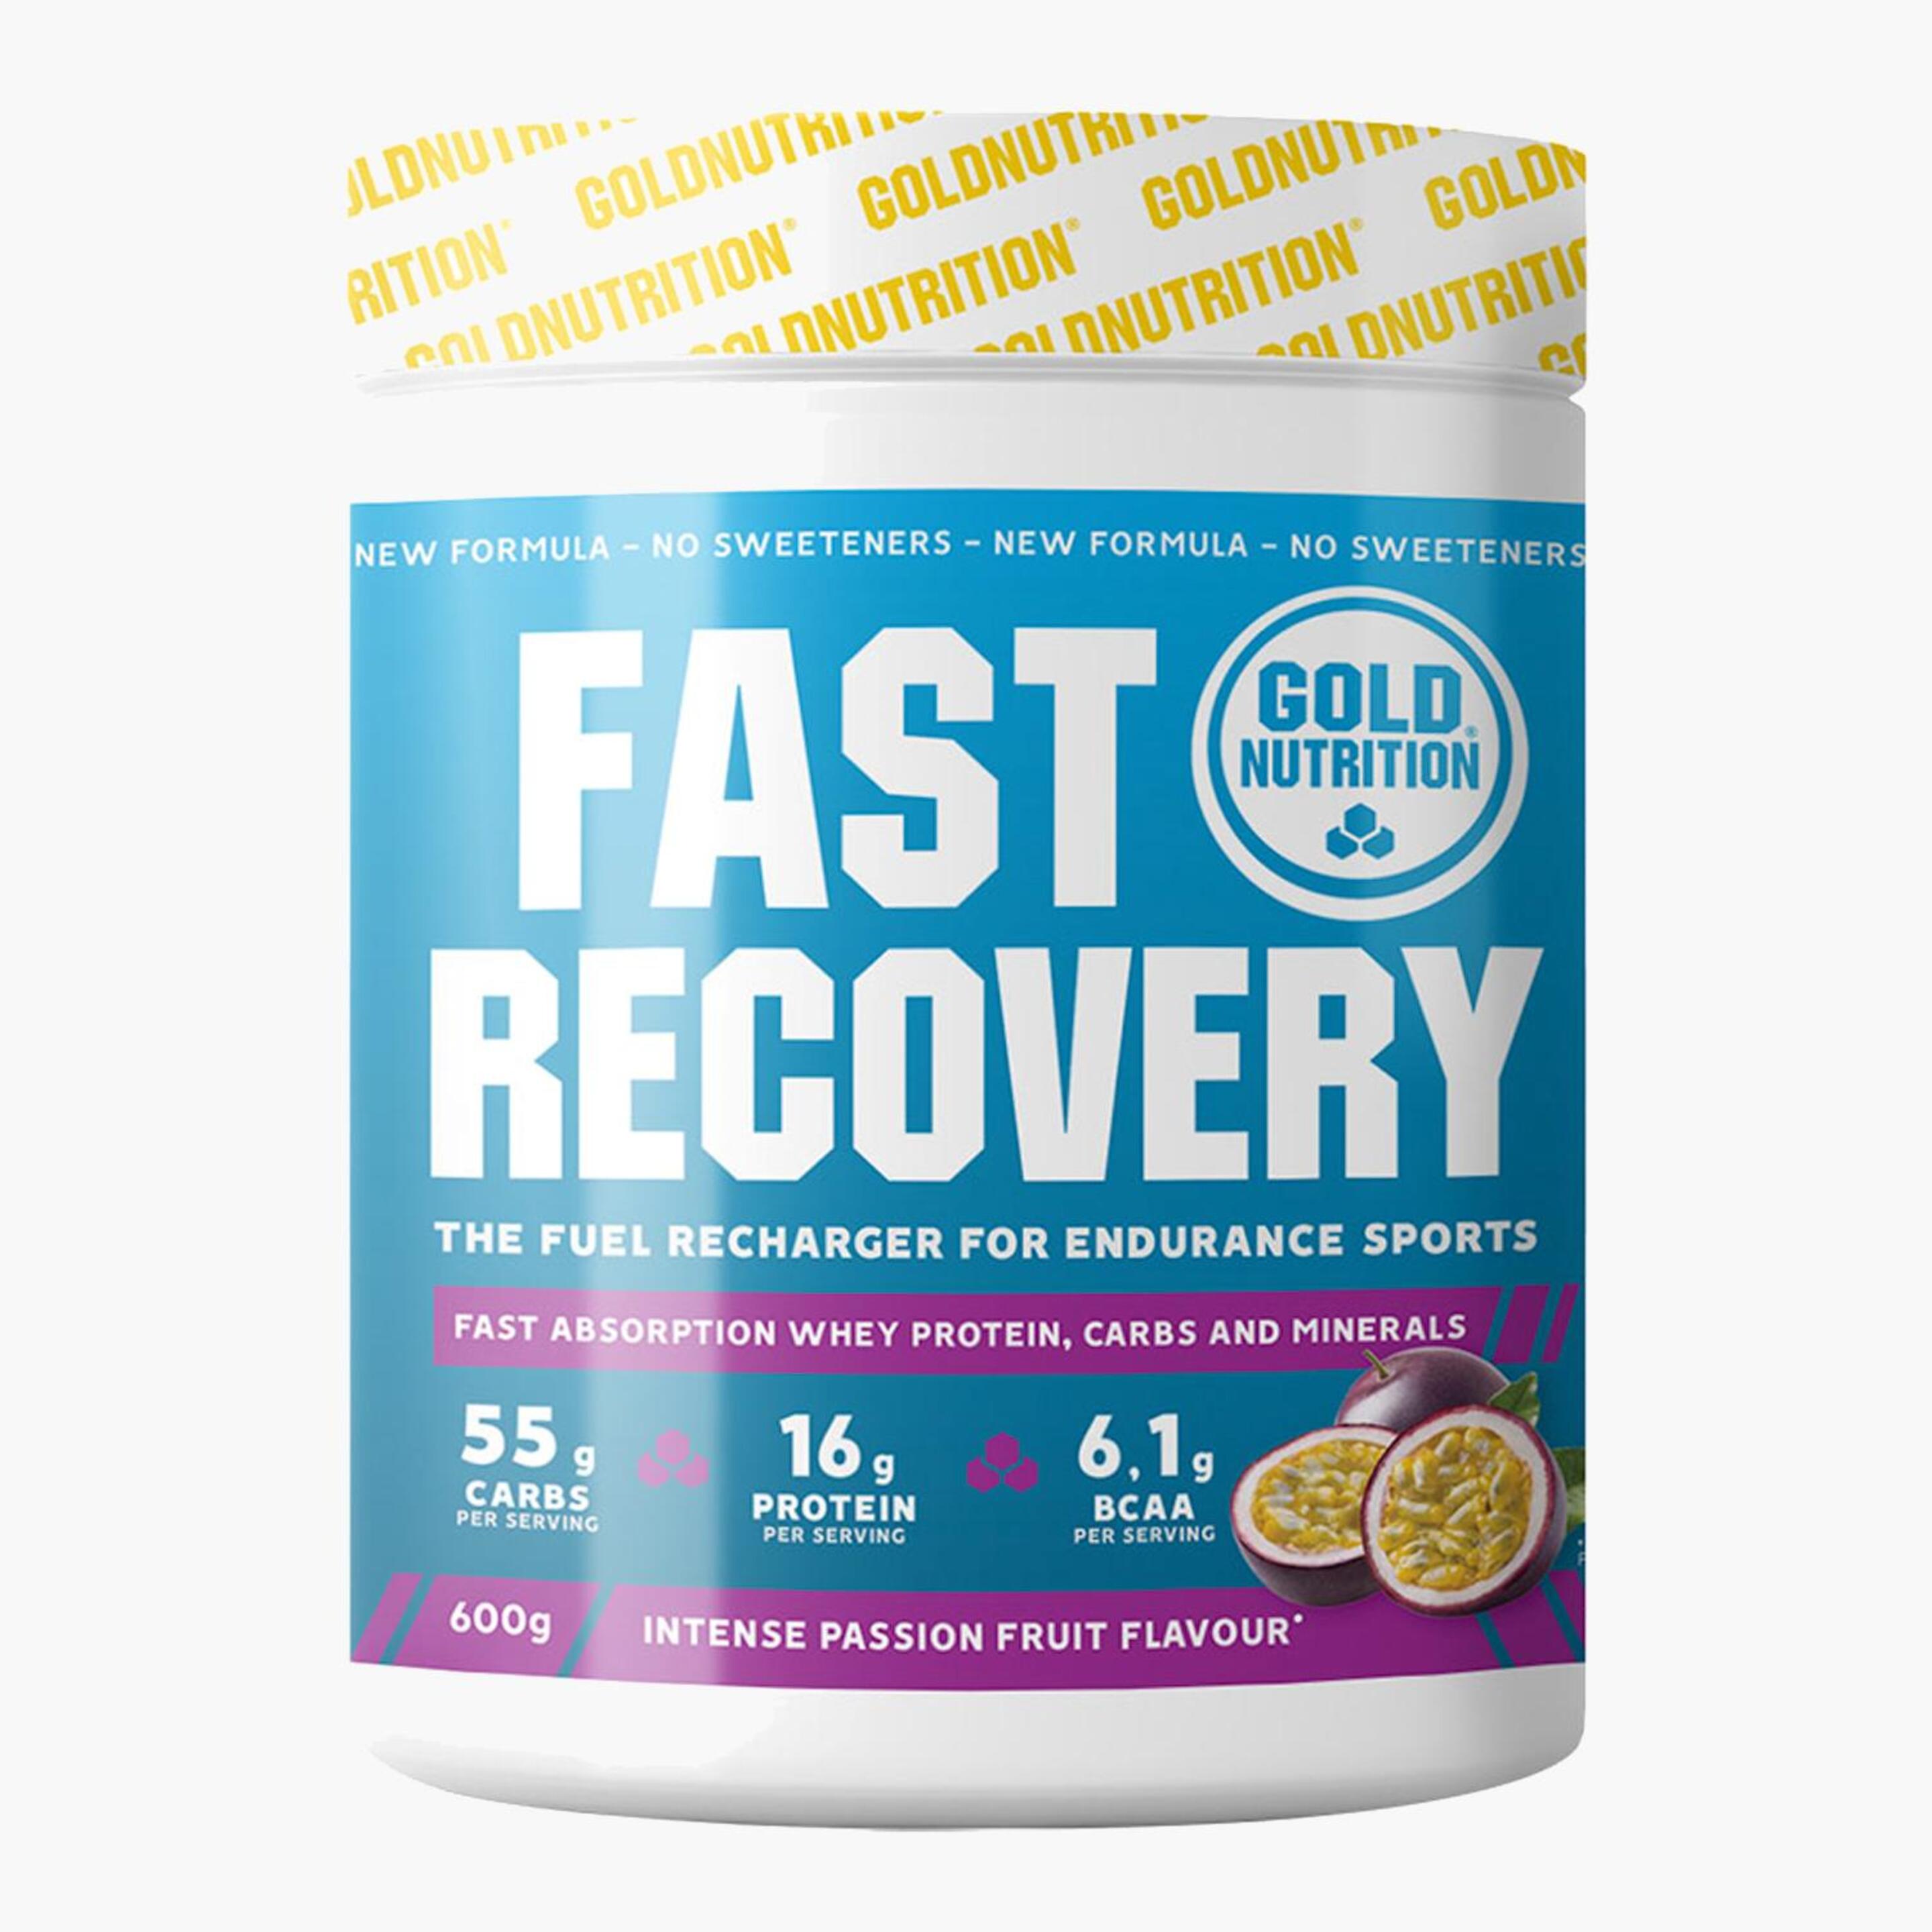 Gold Nutrition Fast Recovery 600g